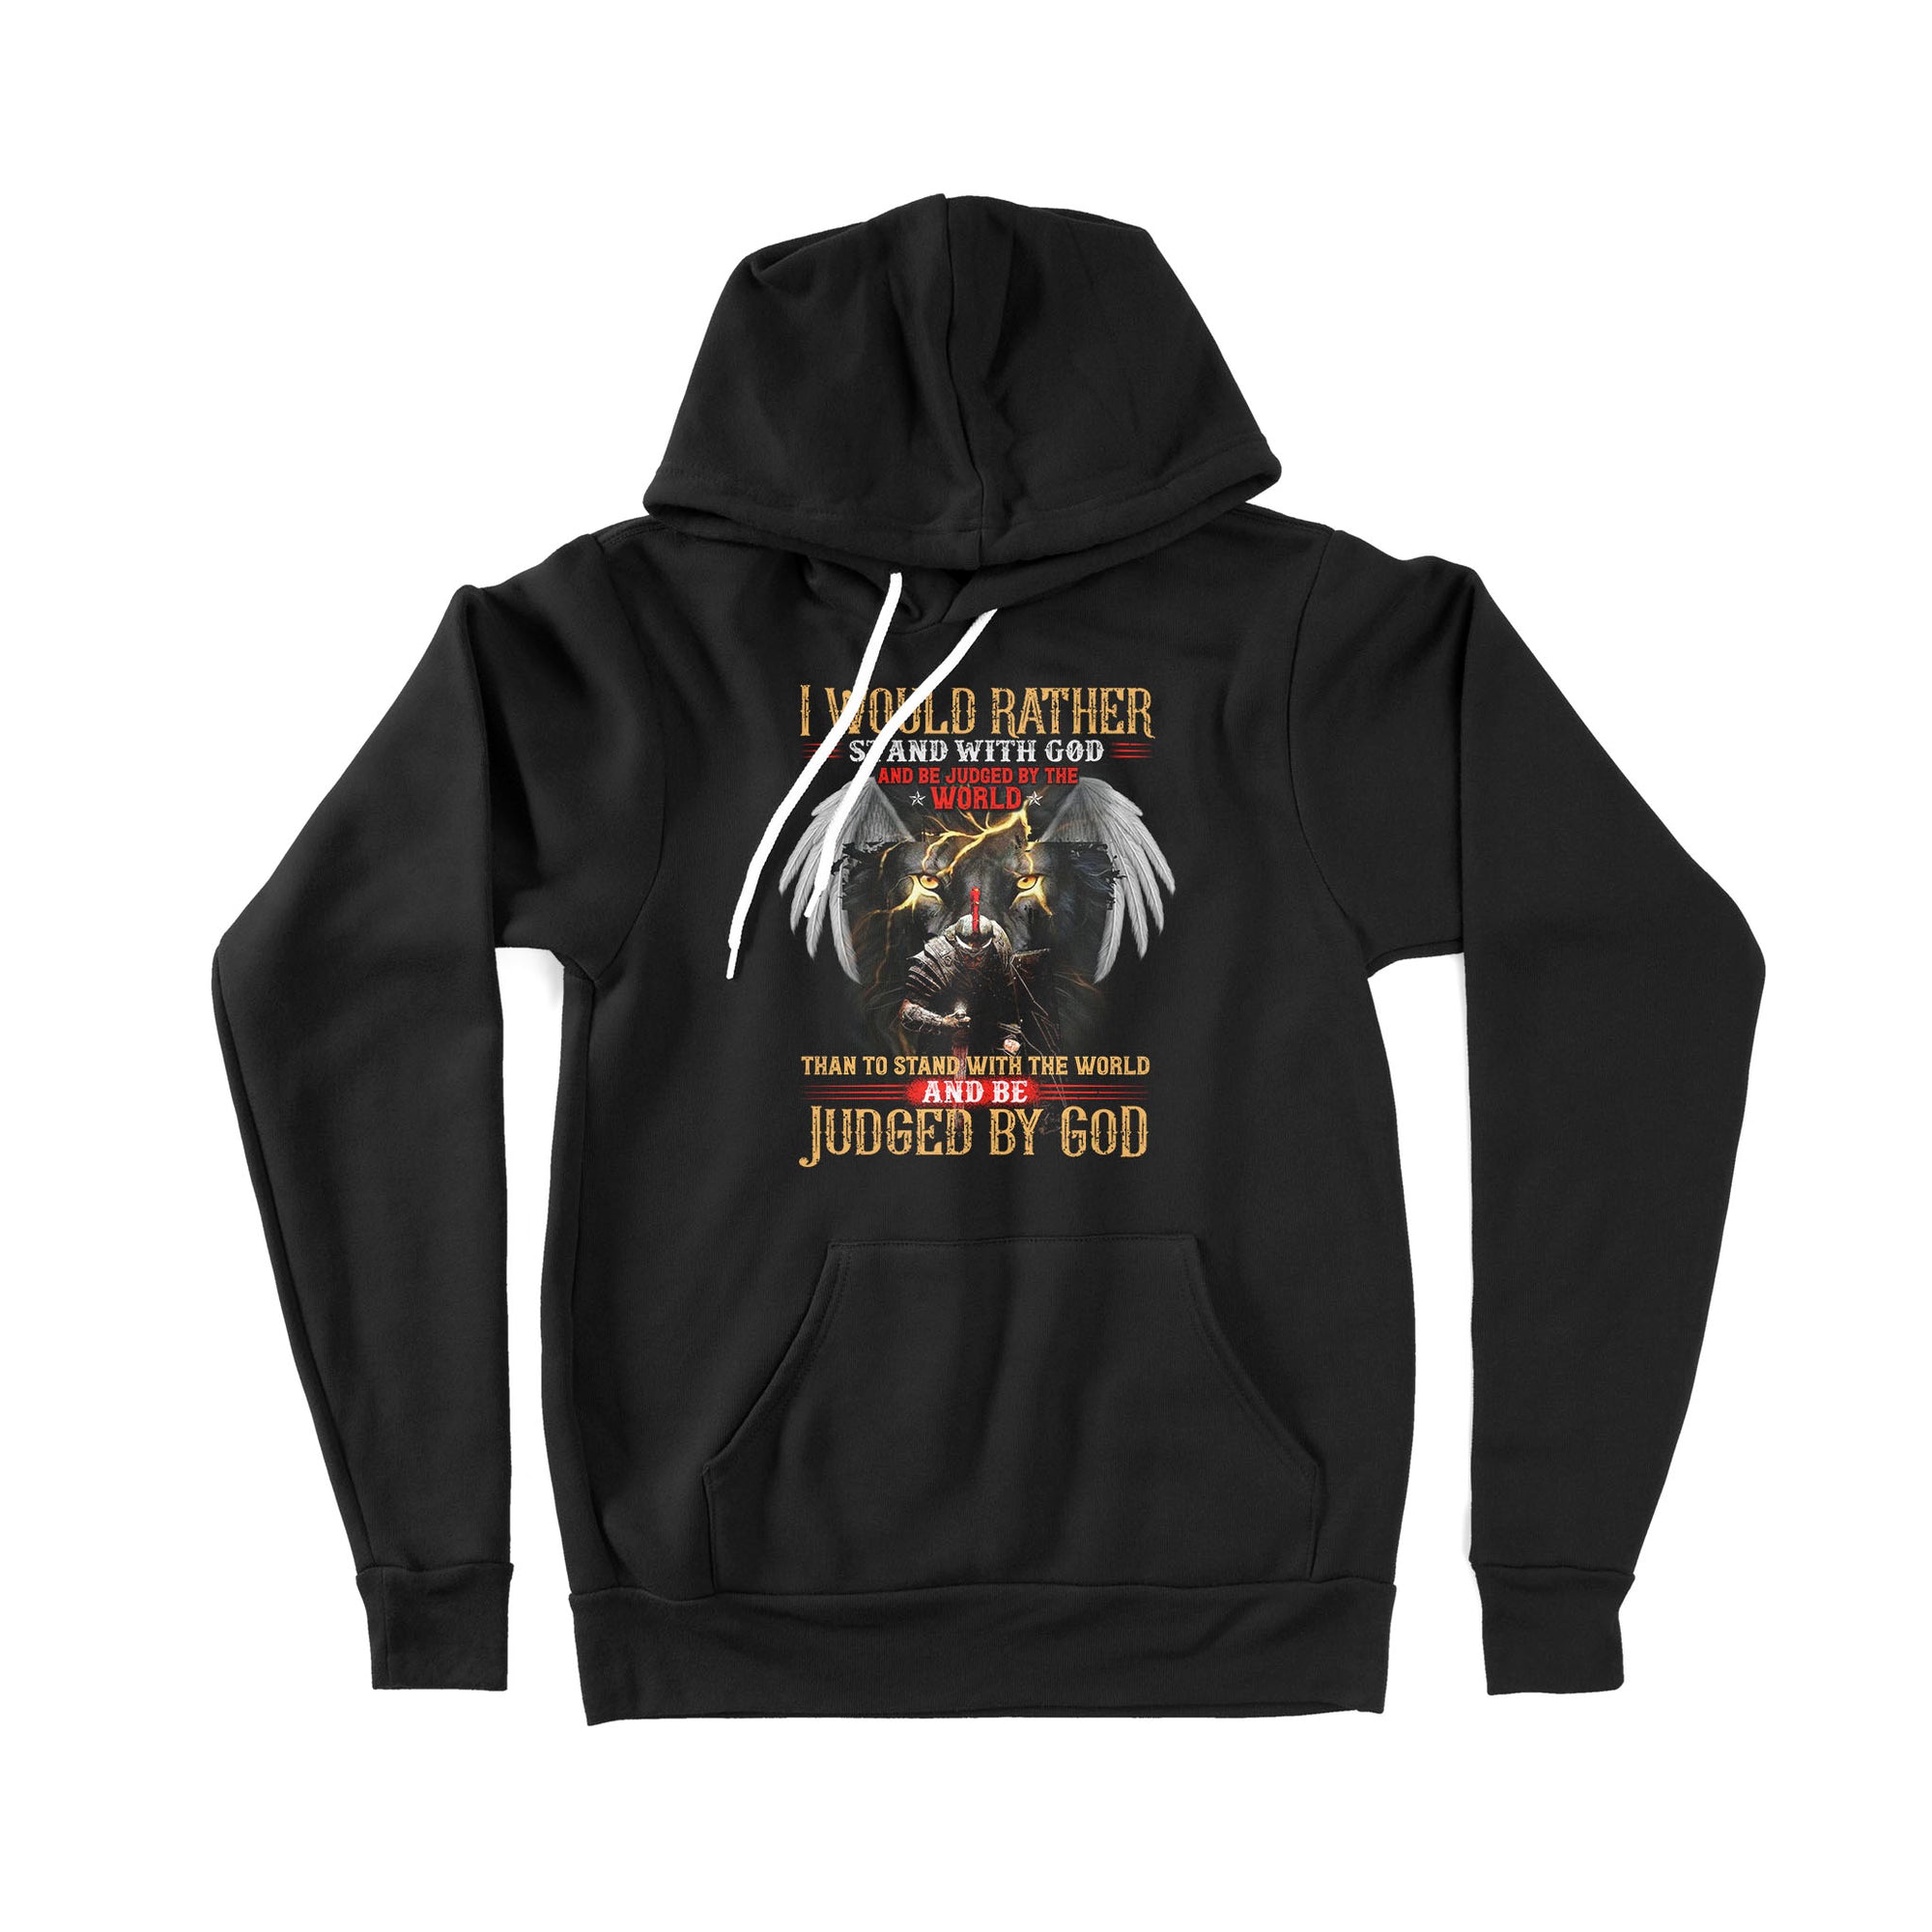 I Would Rather Stand With God And Be Judged By The World Than To Stand With The World And Be Judged By God - Premium Hoodie